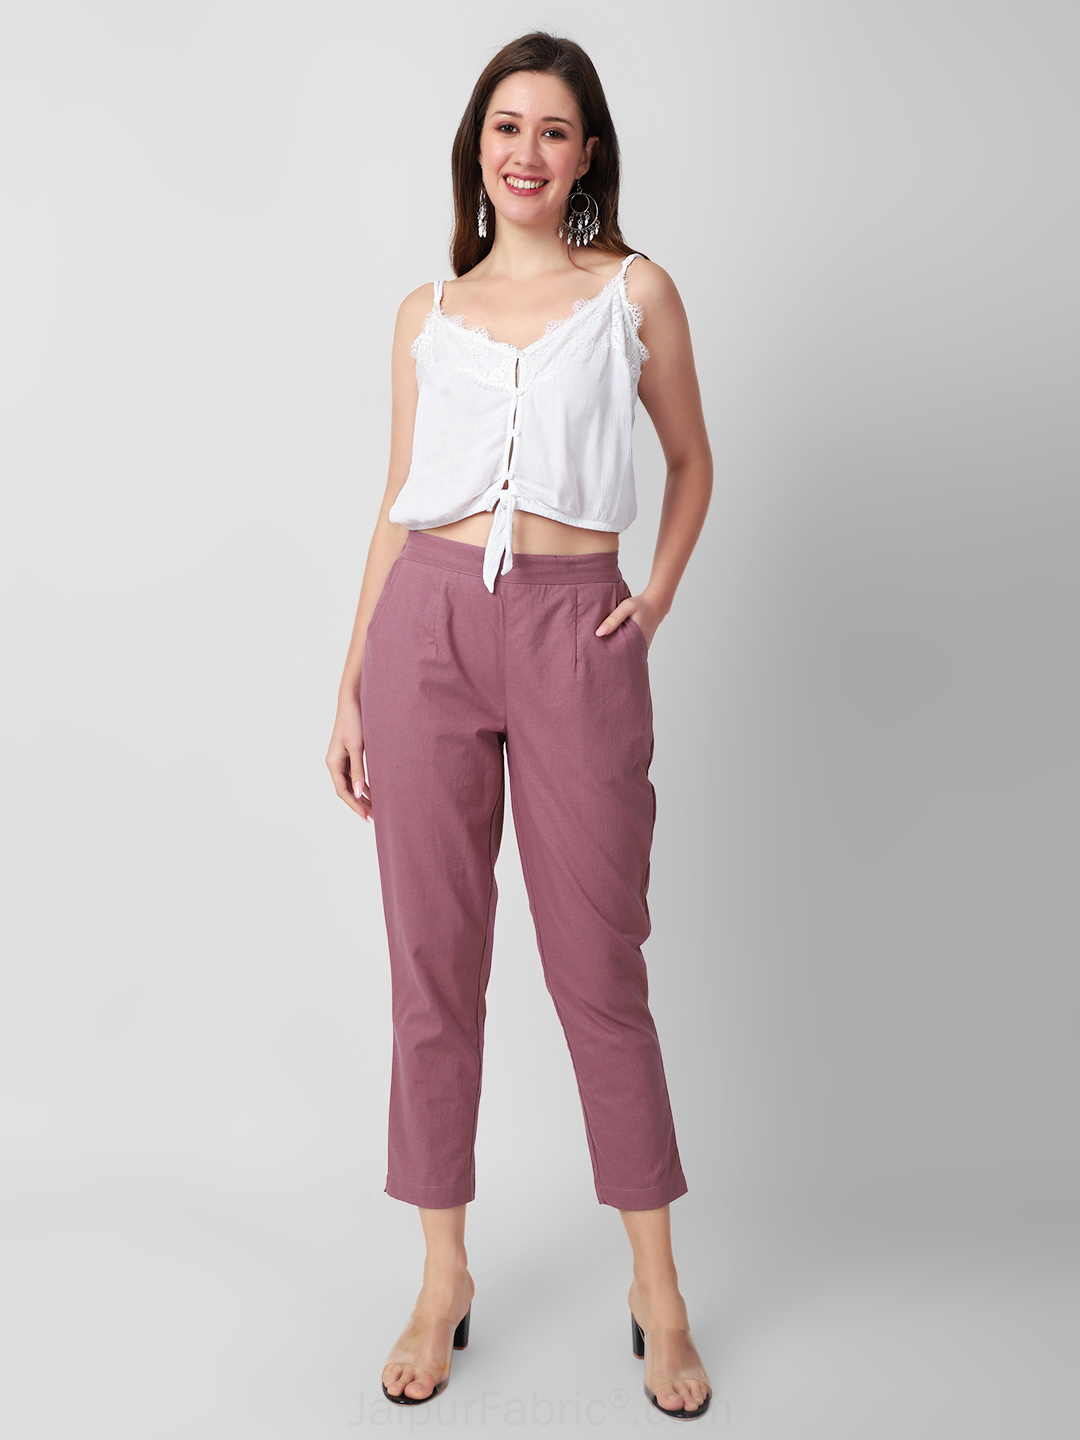 Semi Formal Pant - Clomfi - Redefining what it means to look and feel  fabulous